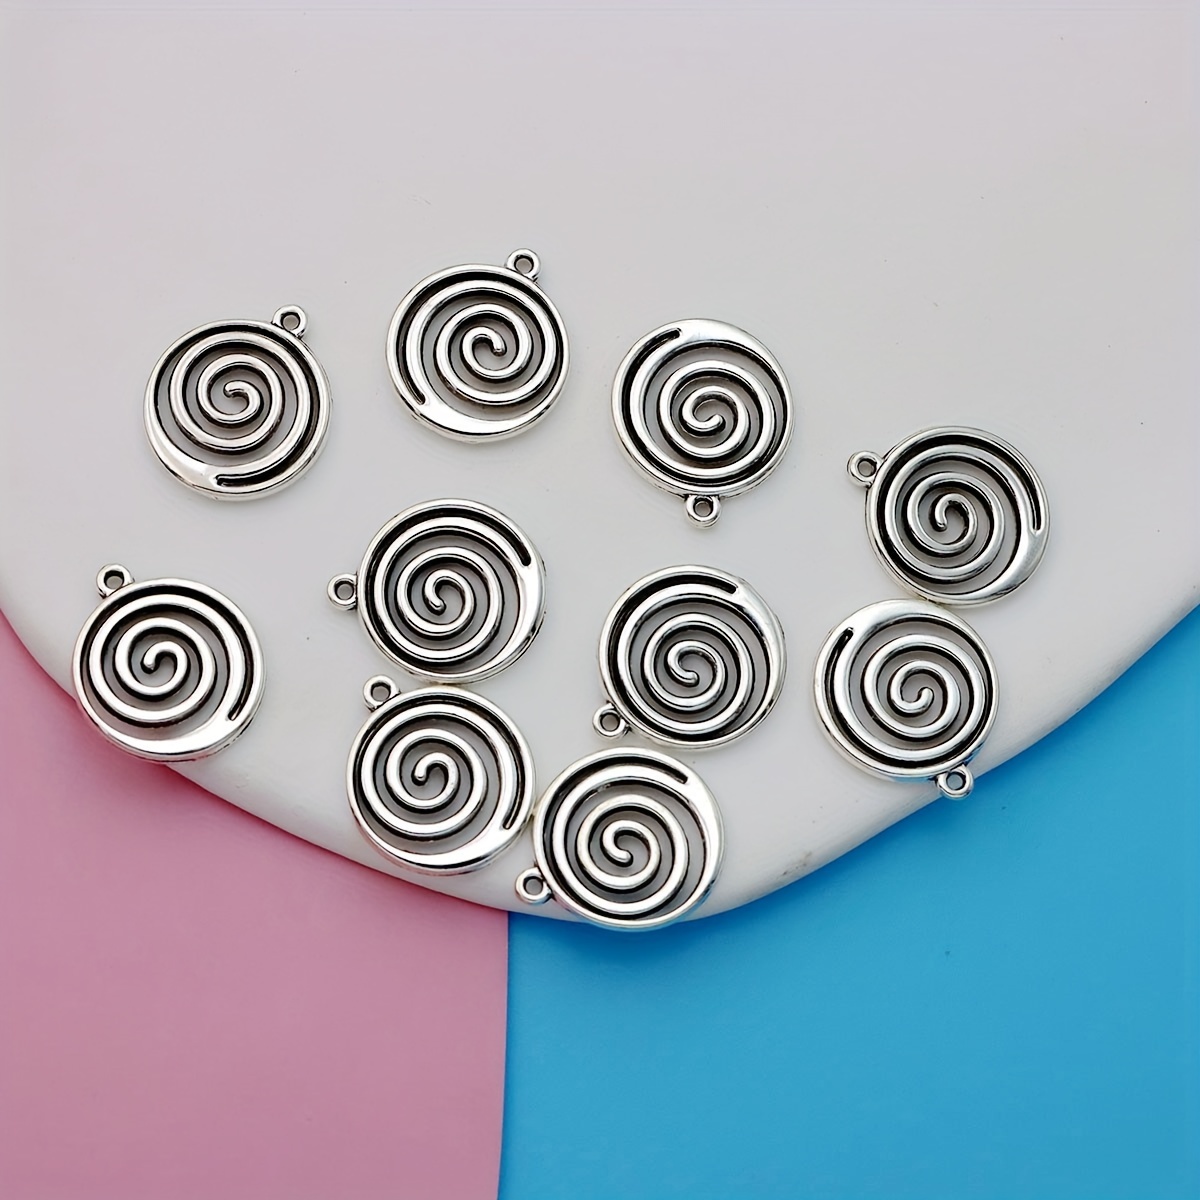 10 Spiral Swirl Circles Tiny Charm for Bracelet/Earrings/Necklace Pendant  Silver